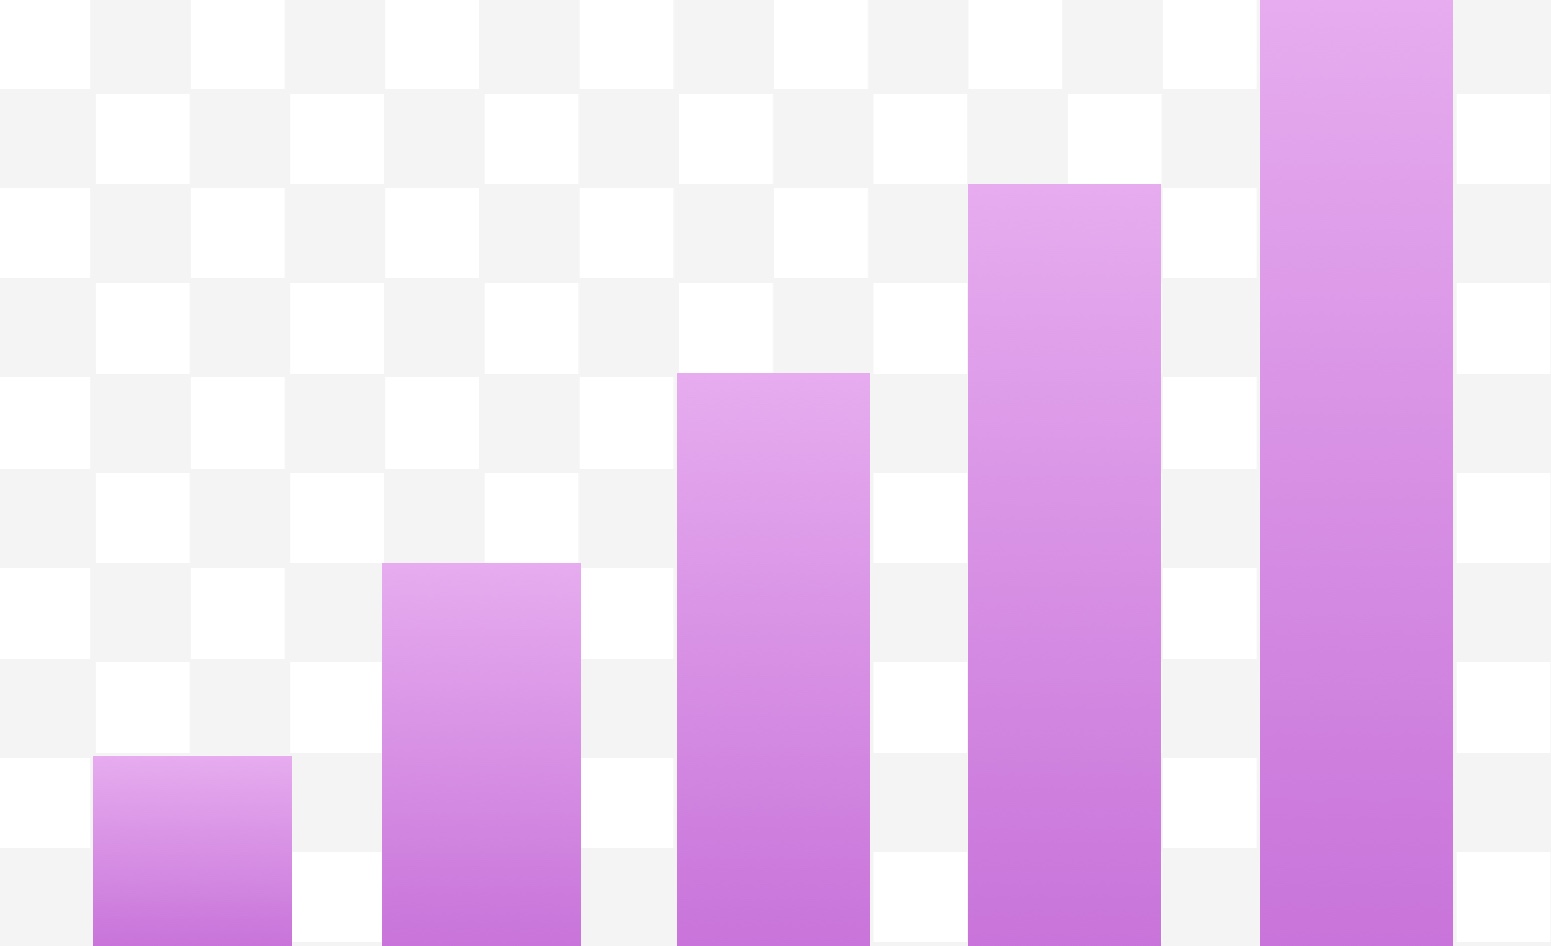 Five vertical purple bars that get progressively taller from left to right like a signal indicator on a cell phone.